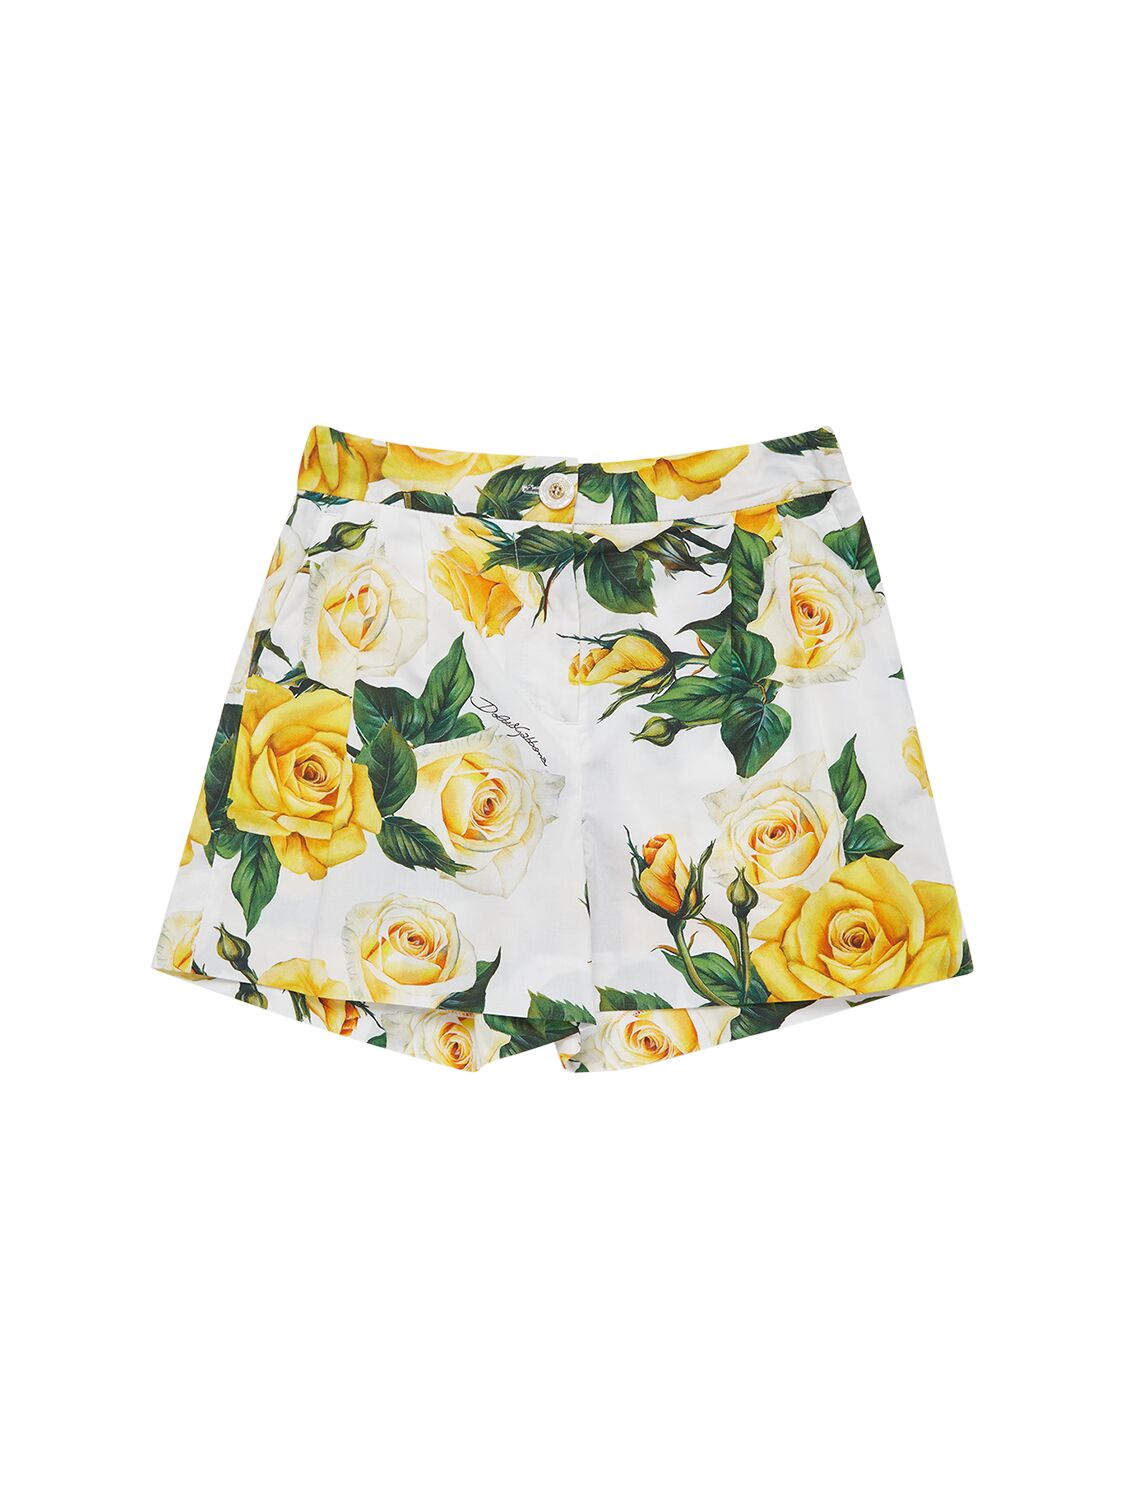 Image of Flower Printed Cotton Shorts